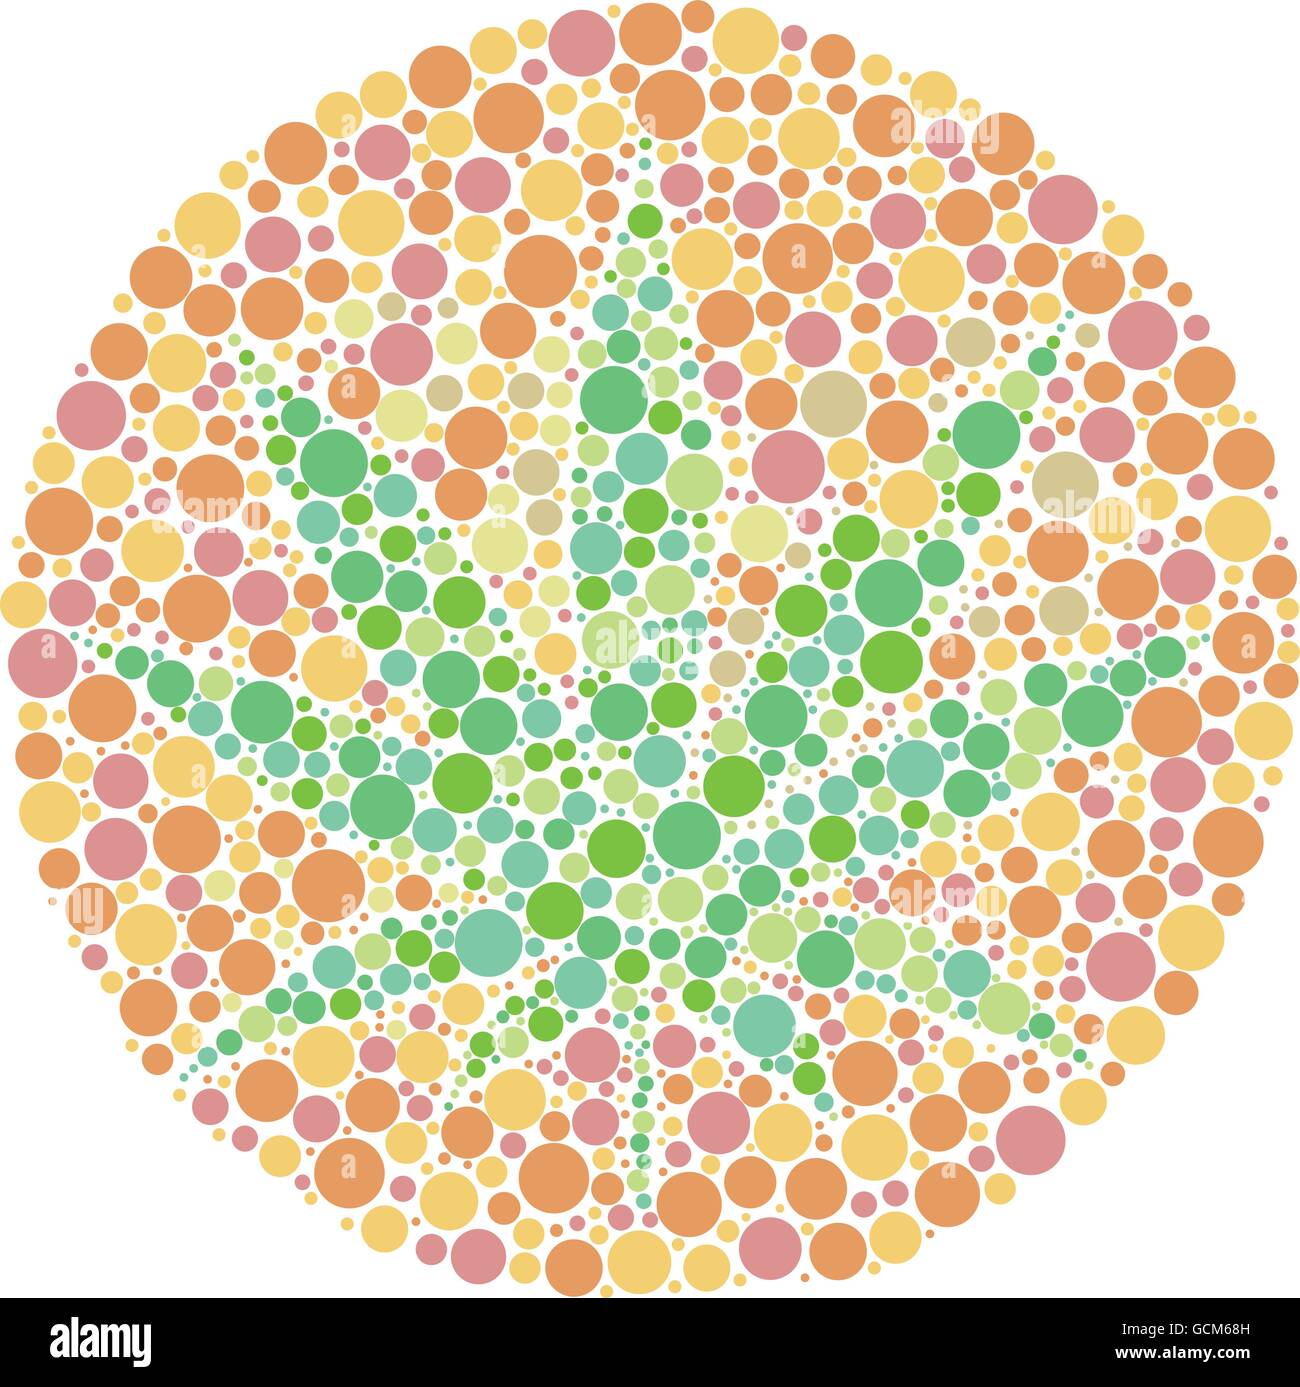 Ishihara color test plate with the shape of cannabis leaf. Vector Illustrator EPS 10. Stock Vector